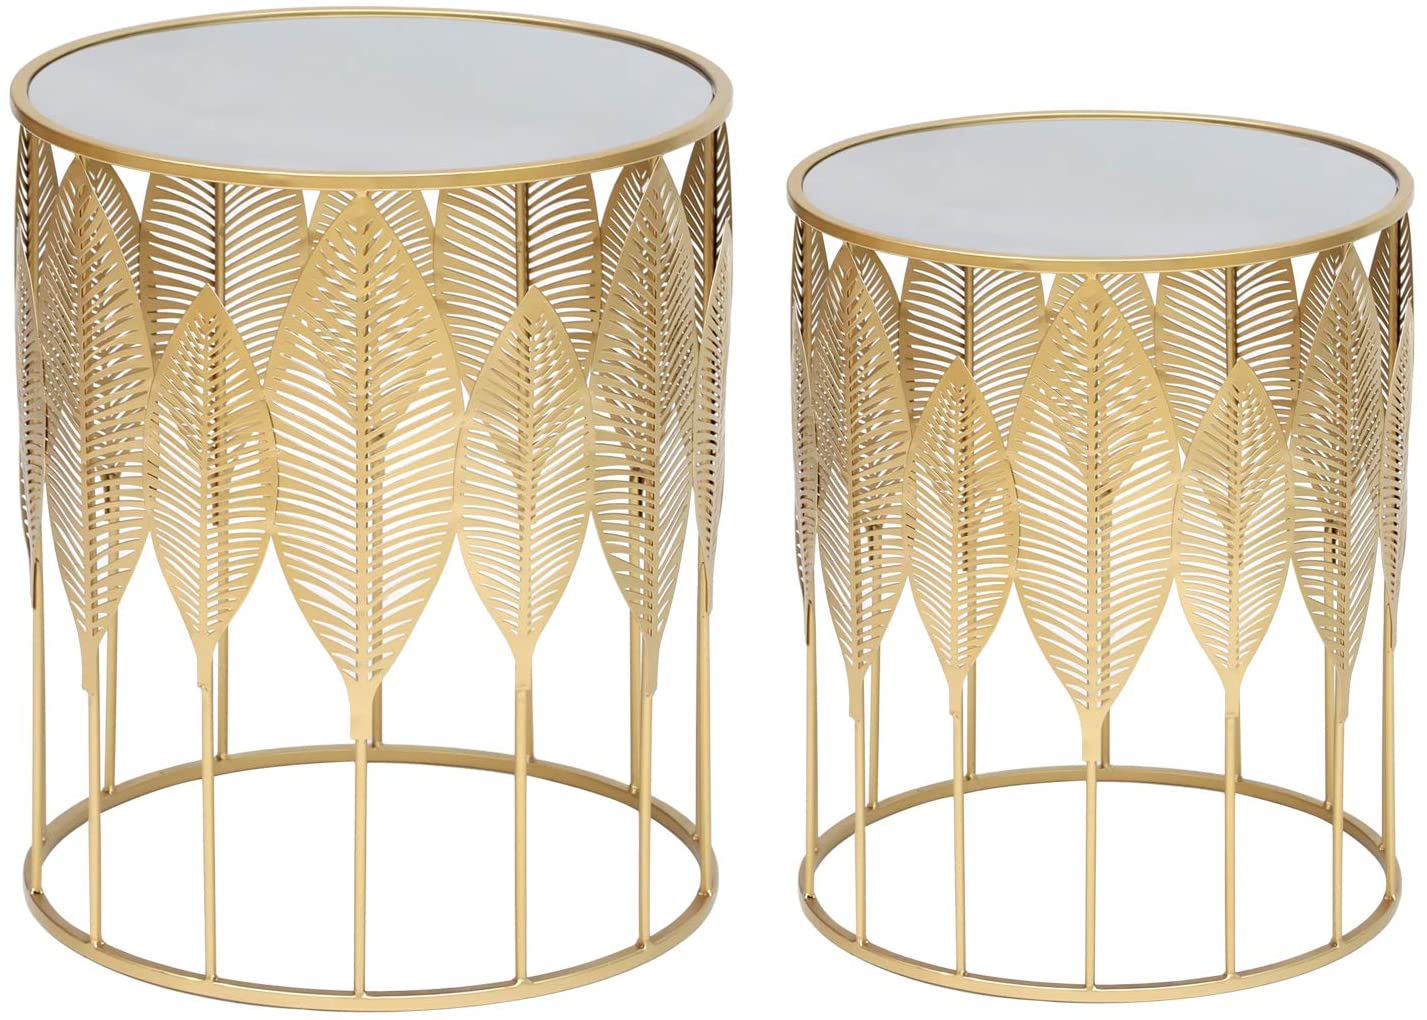 Nest Of Tables : Set of 2 Light Gold Coffee Tables Round Nightstands Stools